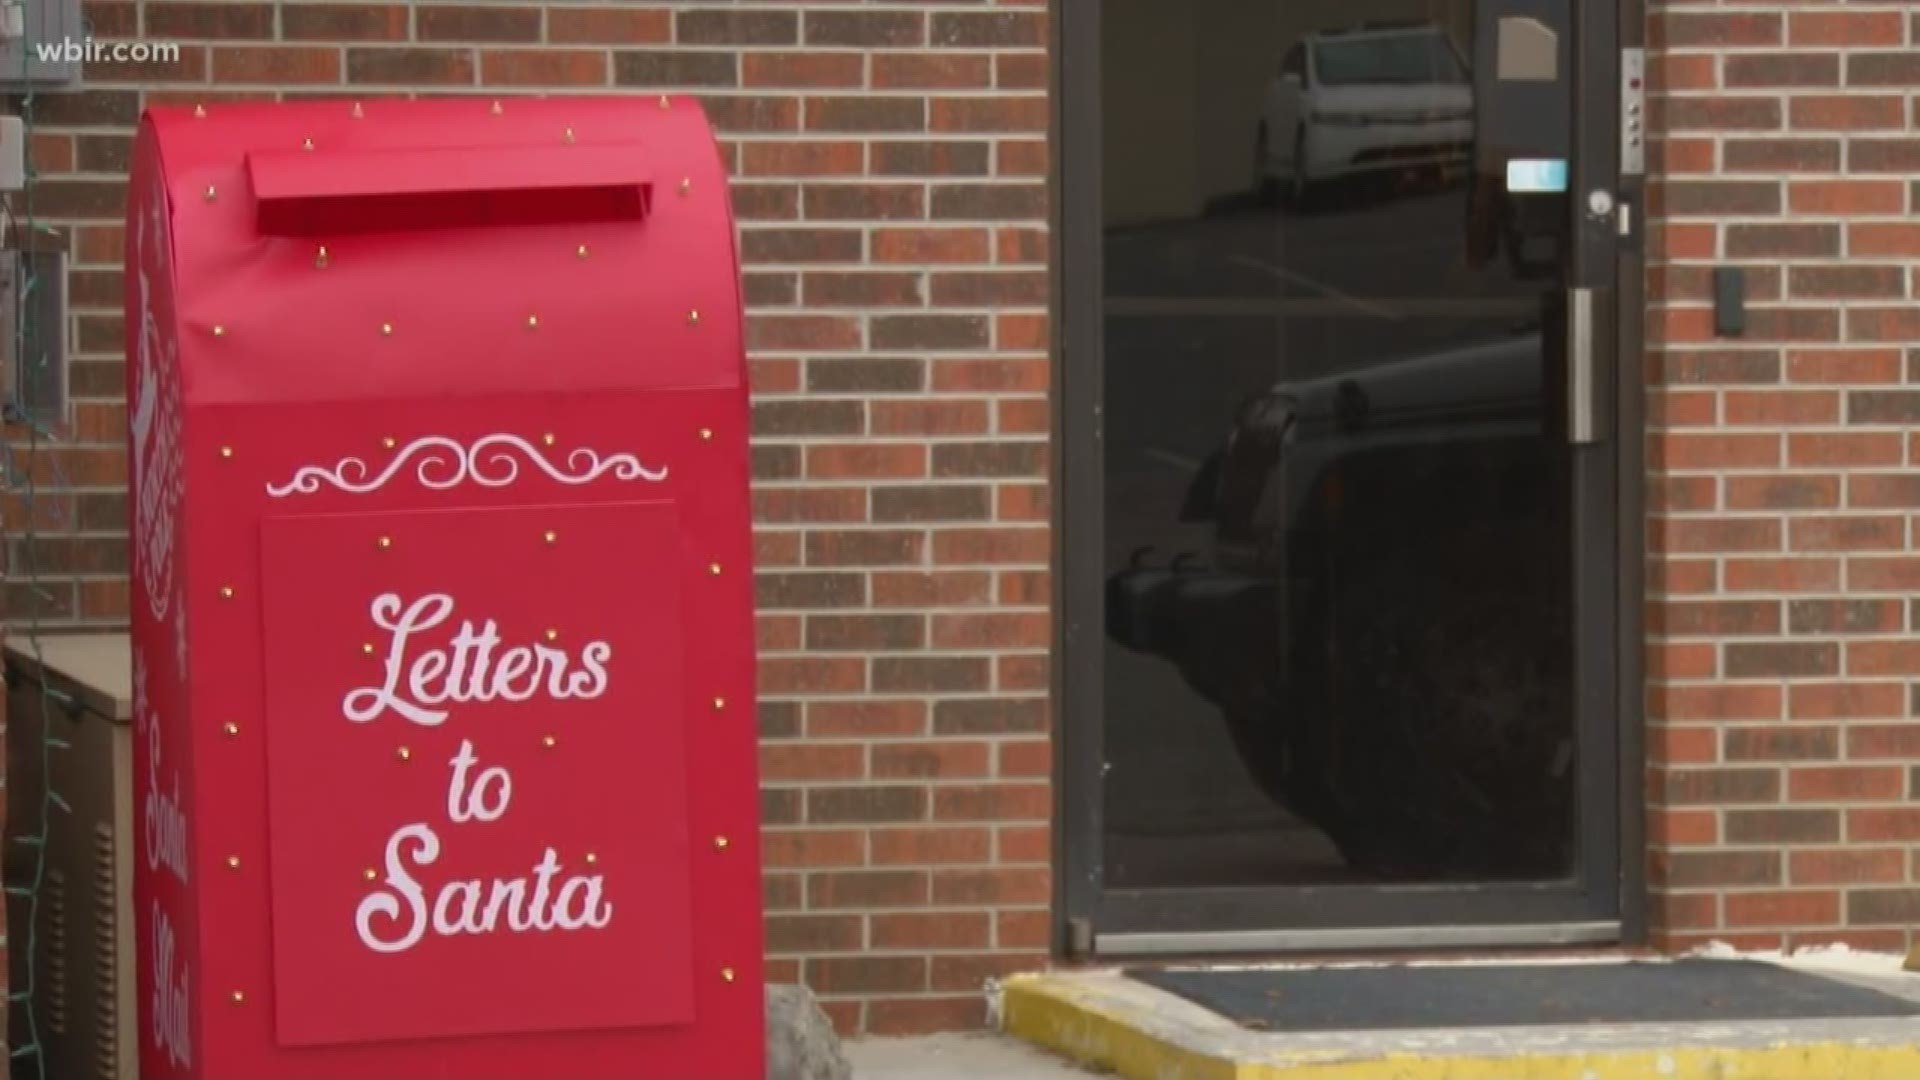 If you still haven't sent off a letter to Santa yet -- firefighters in Seymour want to help.